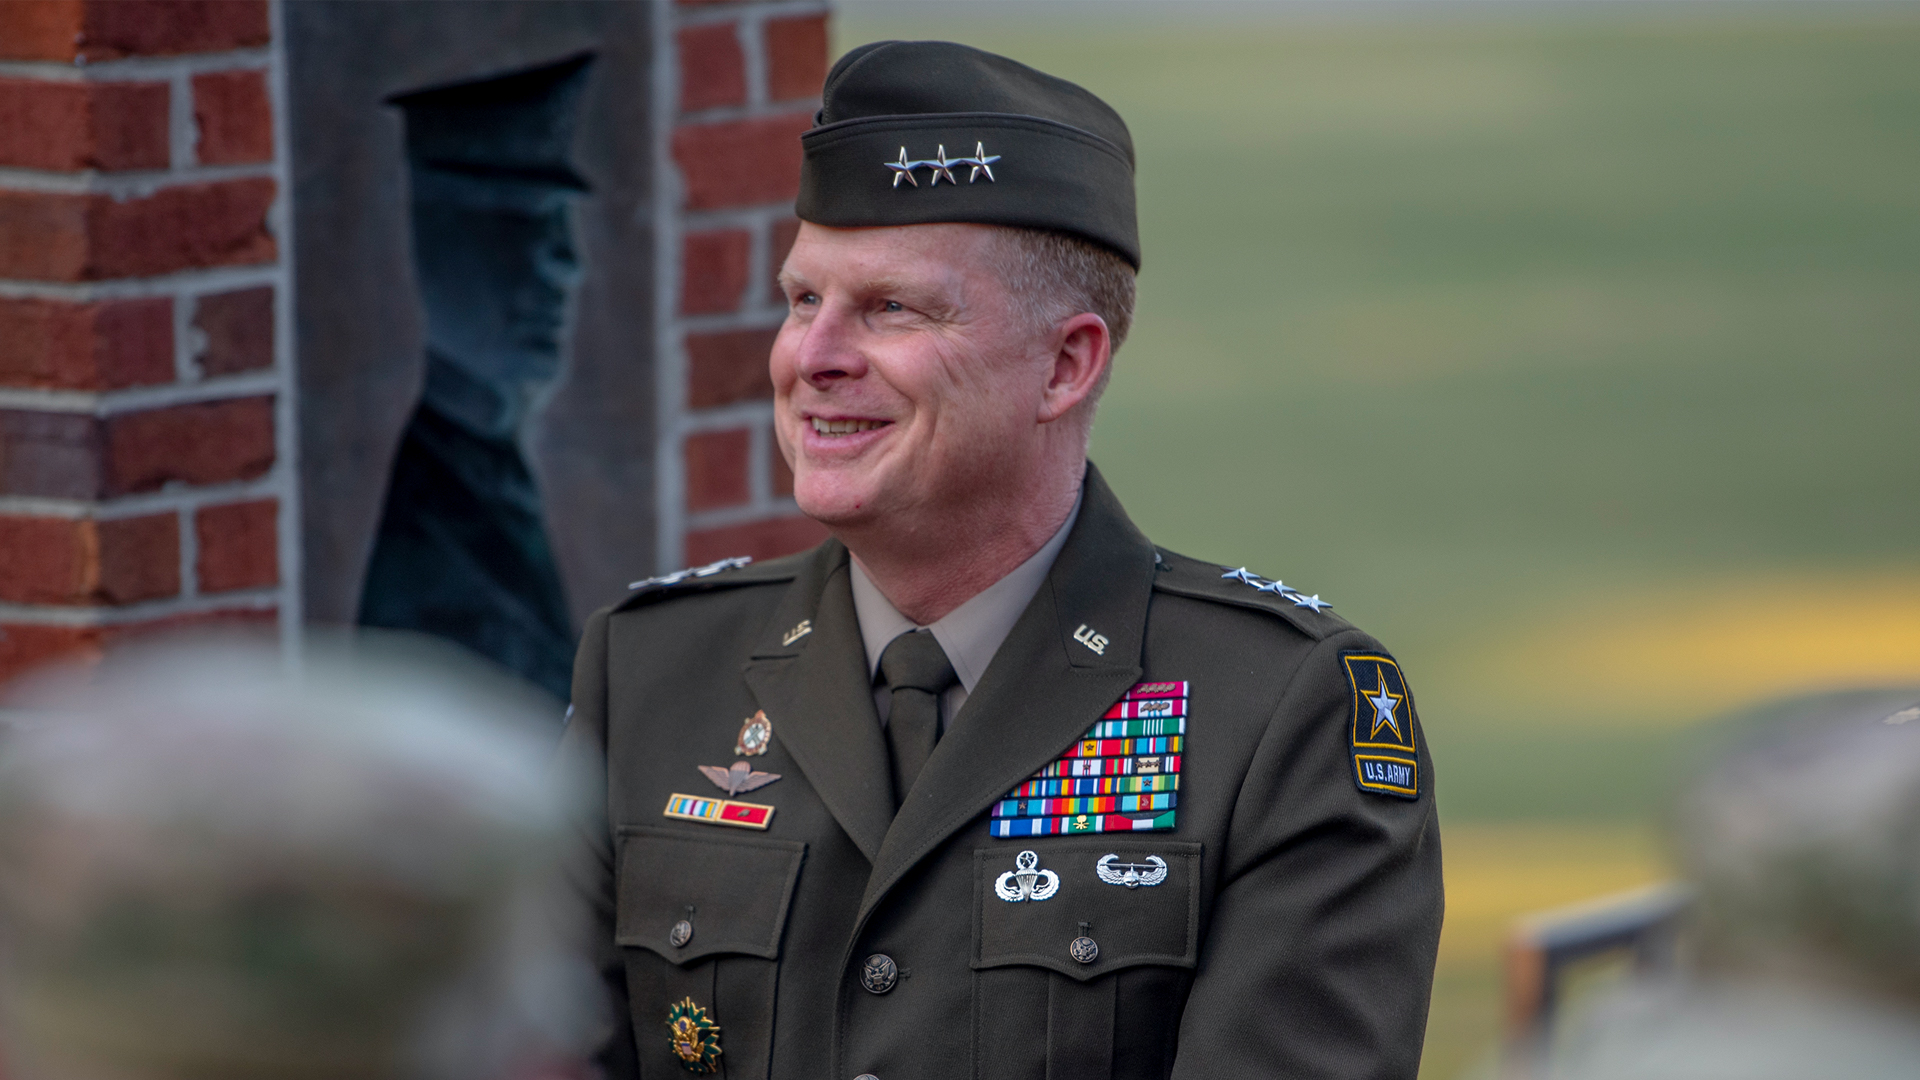 United States Army- 4 star General- Joint Chief of Staff- Full